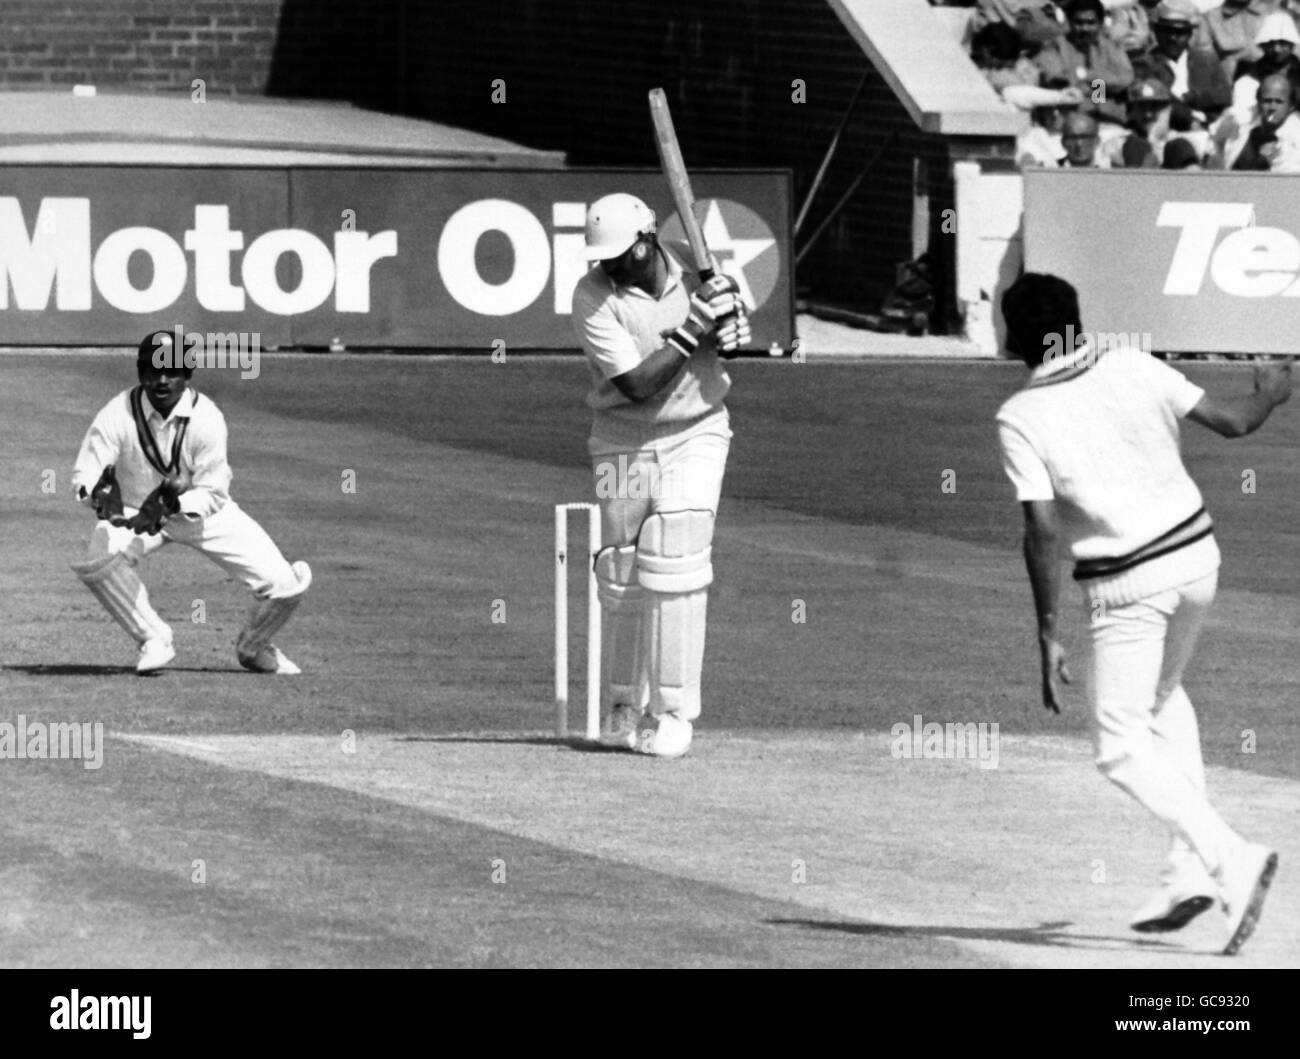 Cricket - England v India - Texaco Trophy 1986 (2nd ODI) - Old Trafford, Manchester. Players in action at the one-day international, England vs India for the Texaco Trophy Stock Photo